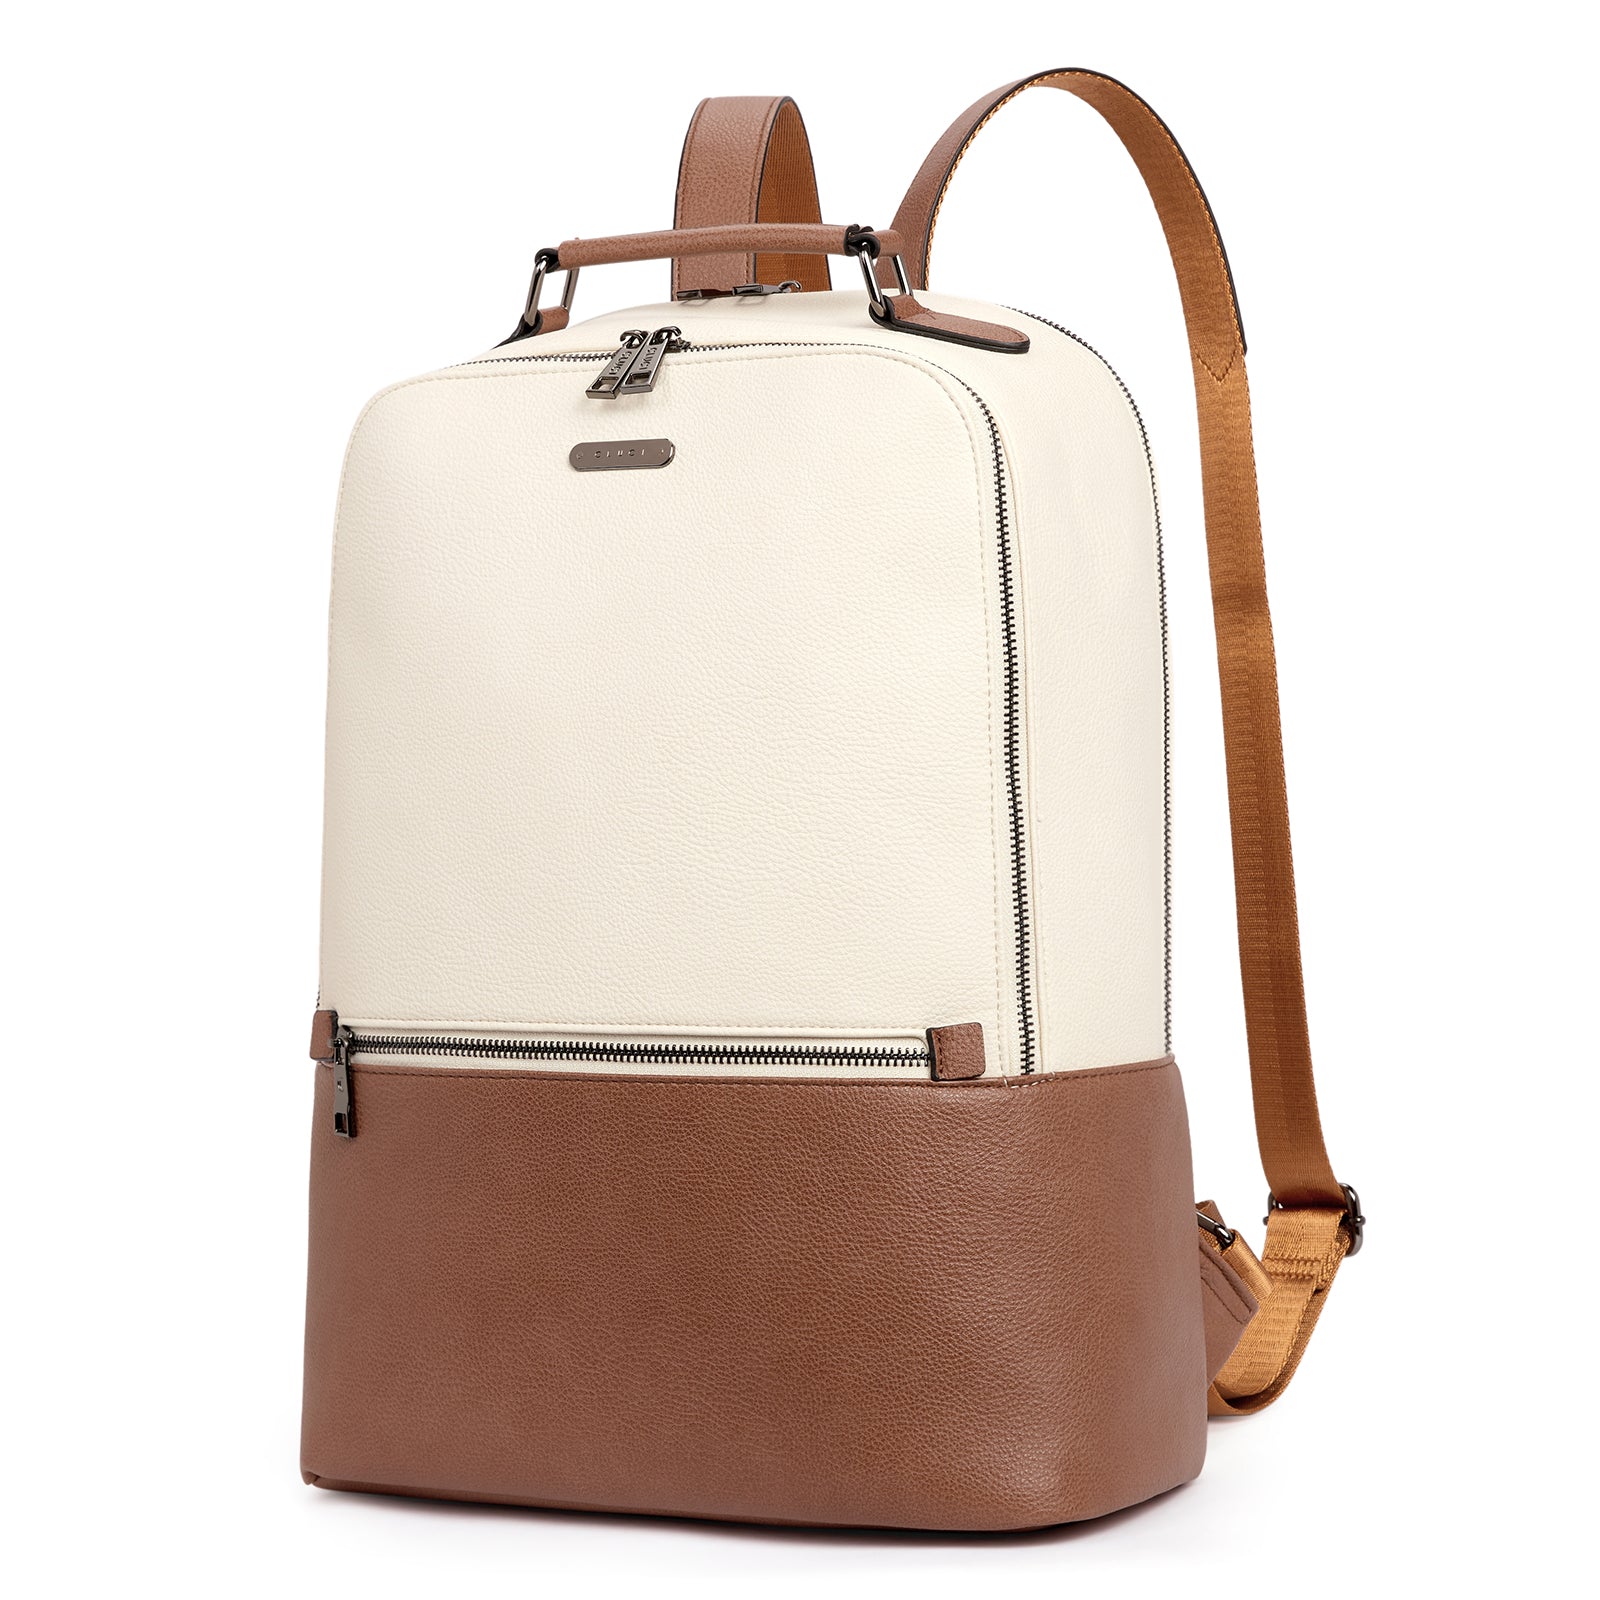 CLUCI Backpack Purse for Women Leather Backpack  